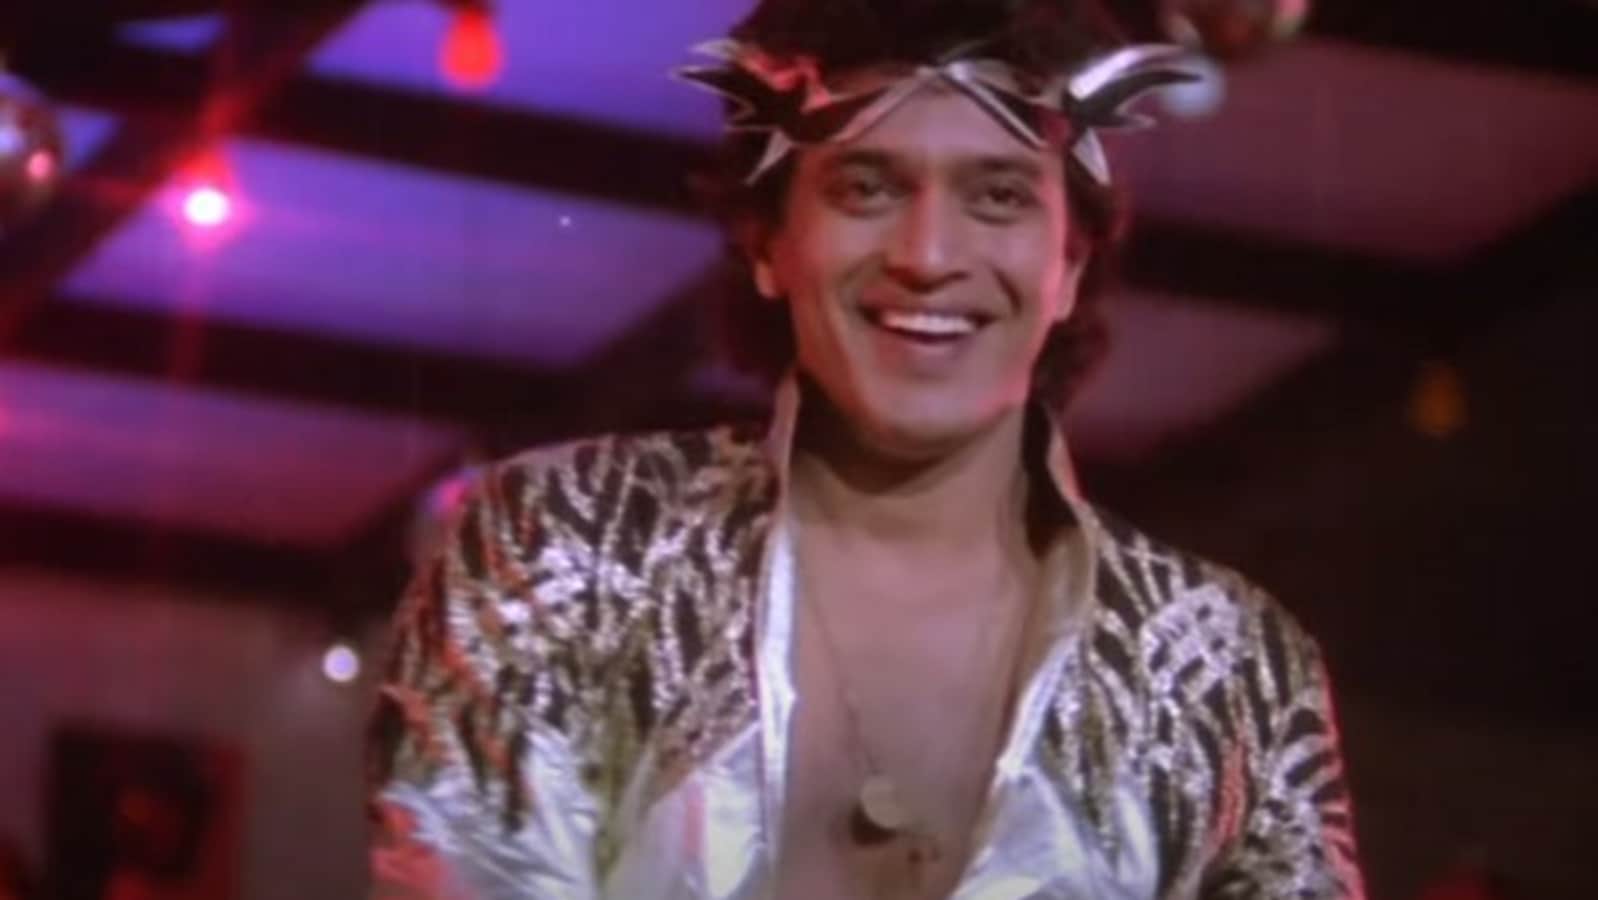 Bestseller' actor Mithun Chakraborty: 'Action and dance have no language